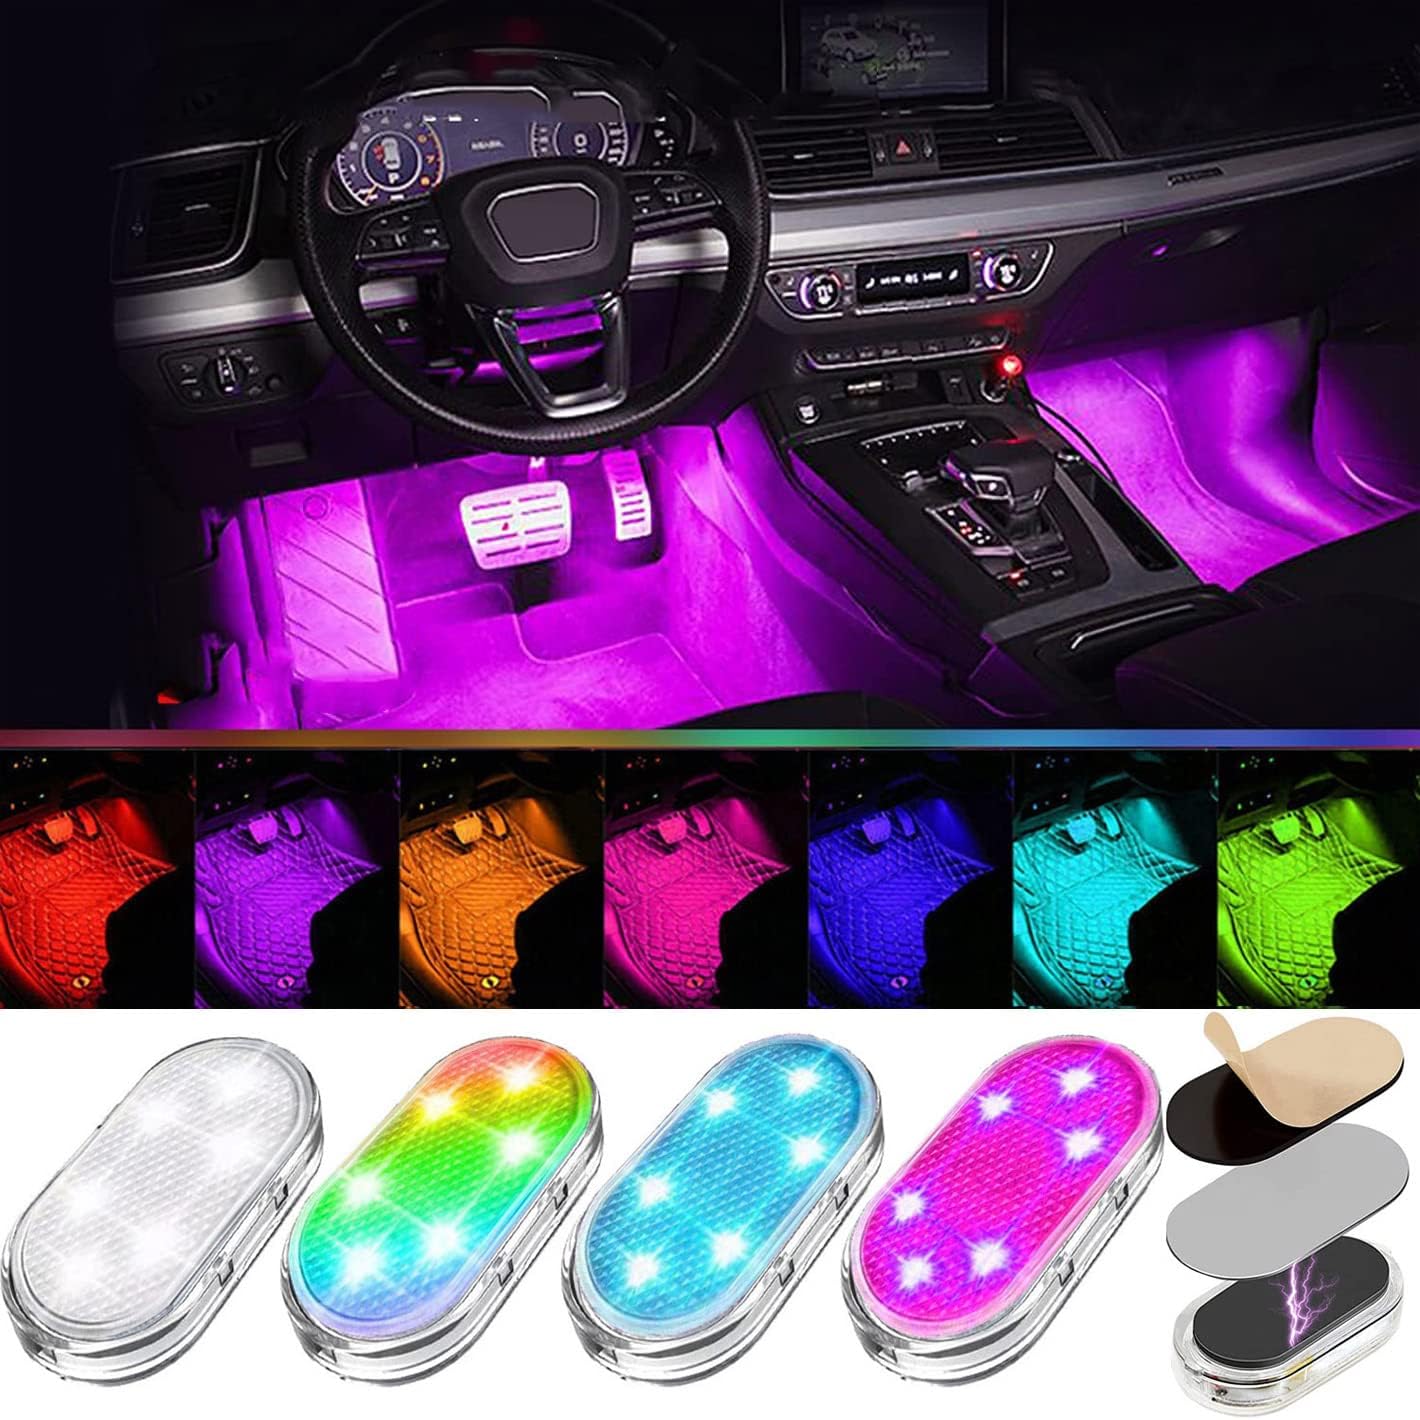 4pcs Wireless Led Lights for Car Interior, Car Led Lights Interior, USB Rechargeable Automotive Neon Accent Light Kits, Free Installation of Magnetic Car Interior Lights (4pcs 7colors)